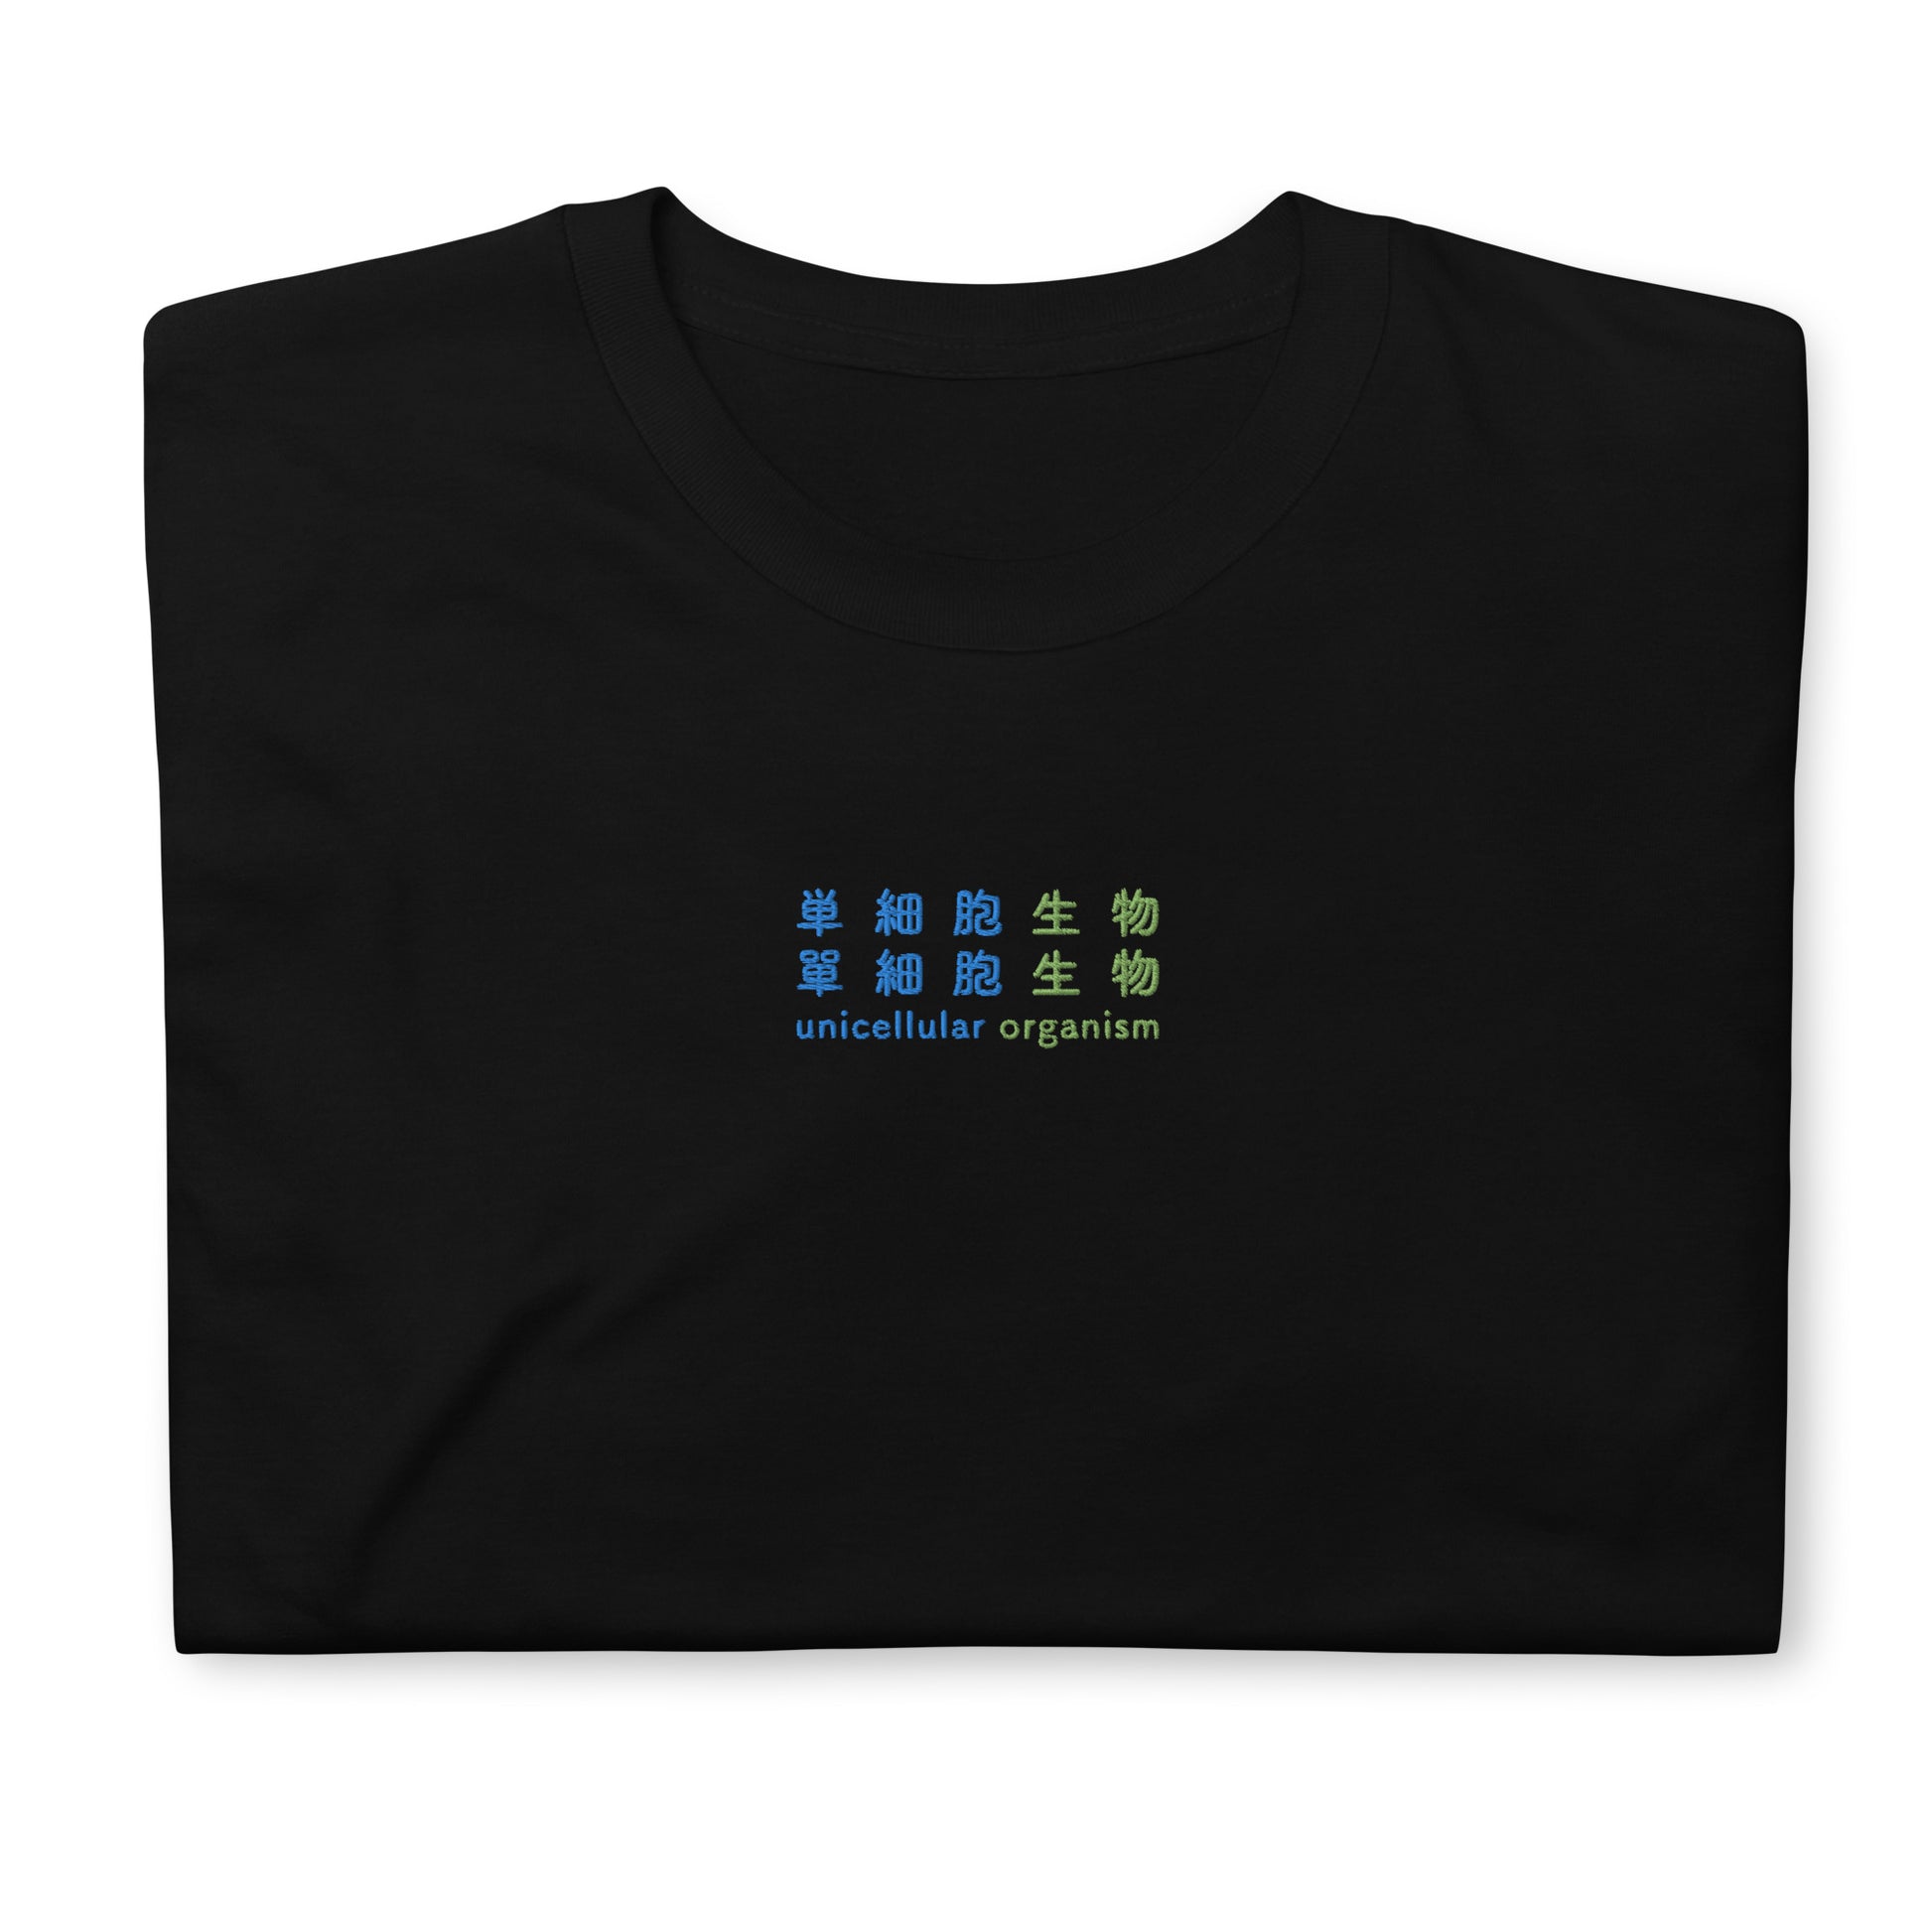 Black High Quality Tee - Front Design with an Green,Blue Embroidery "unicellular organism" in Japanese,Chinese and English